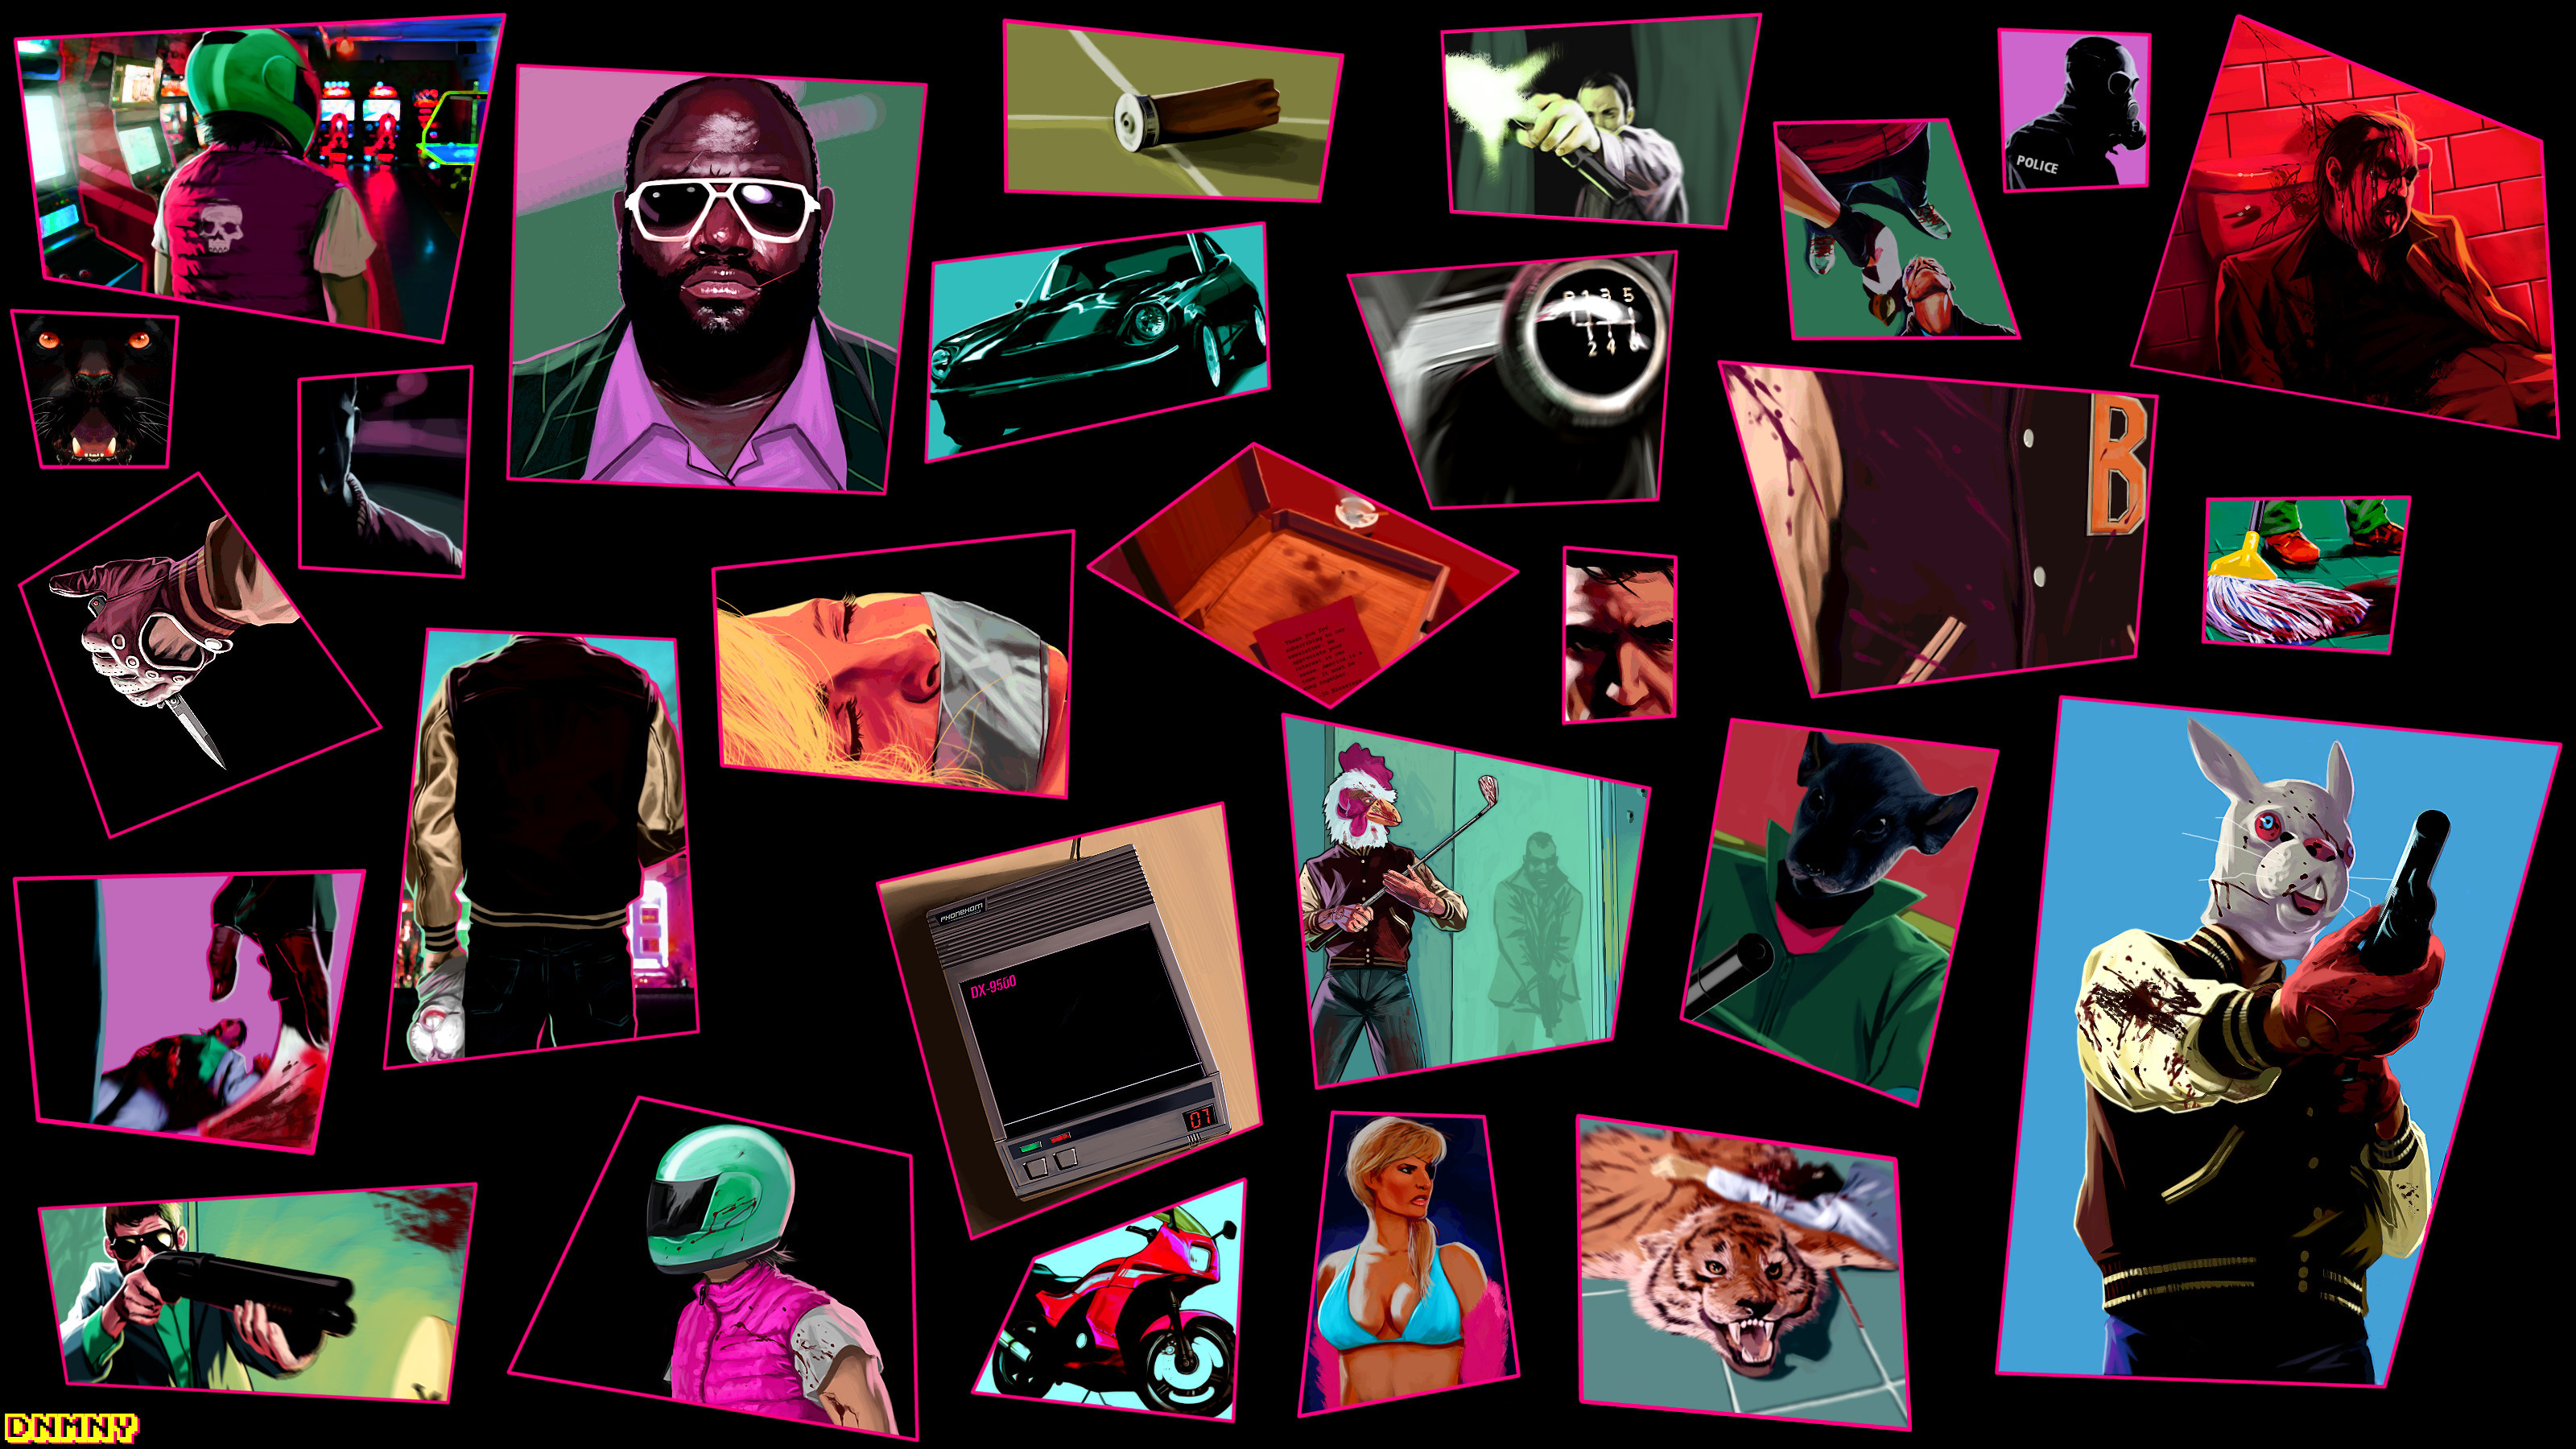 3200x1800 Hotline Miami in pictures by DNMNY